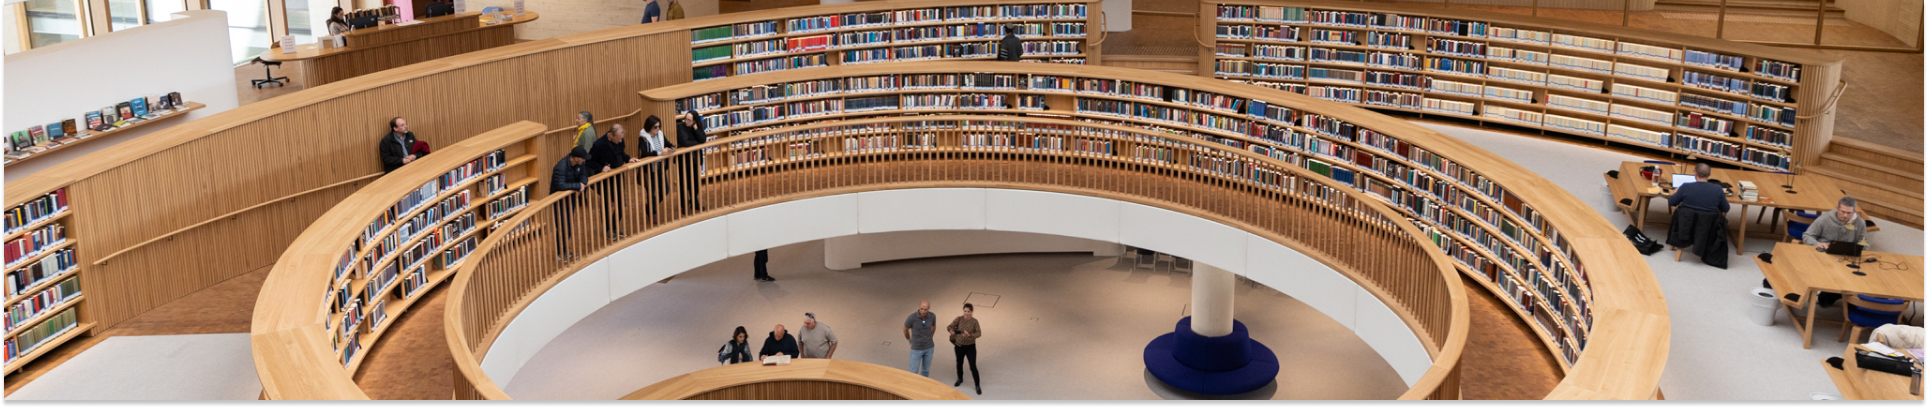 Entering the reading halls at the National Library of Israel with your personal library card